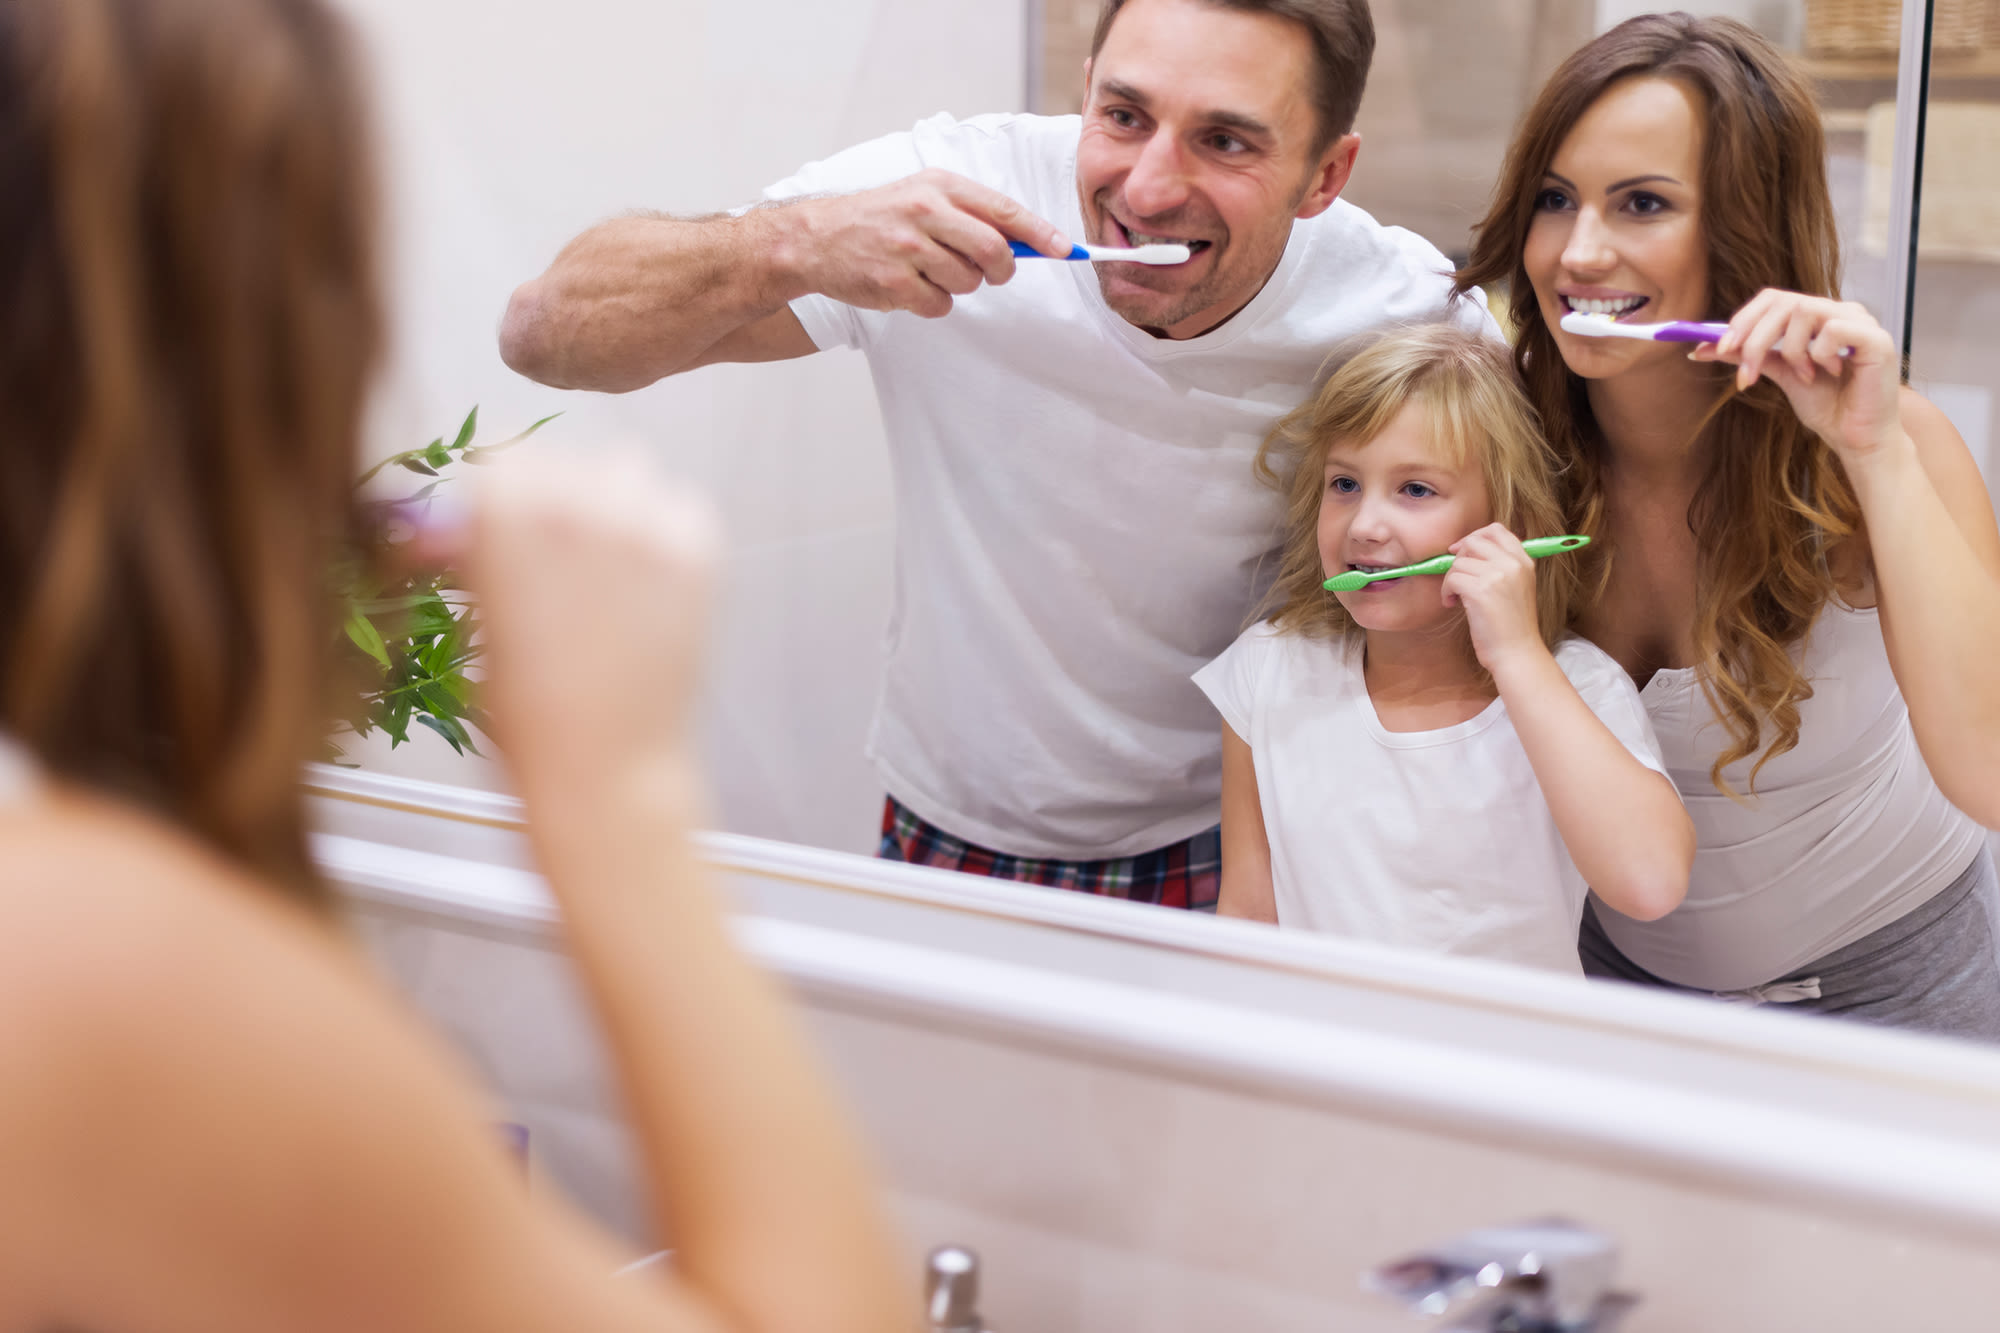 A family brushing their teeth together.